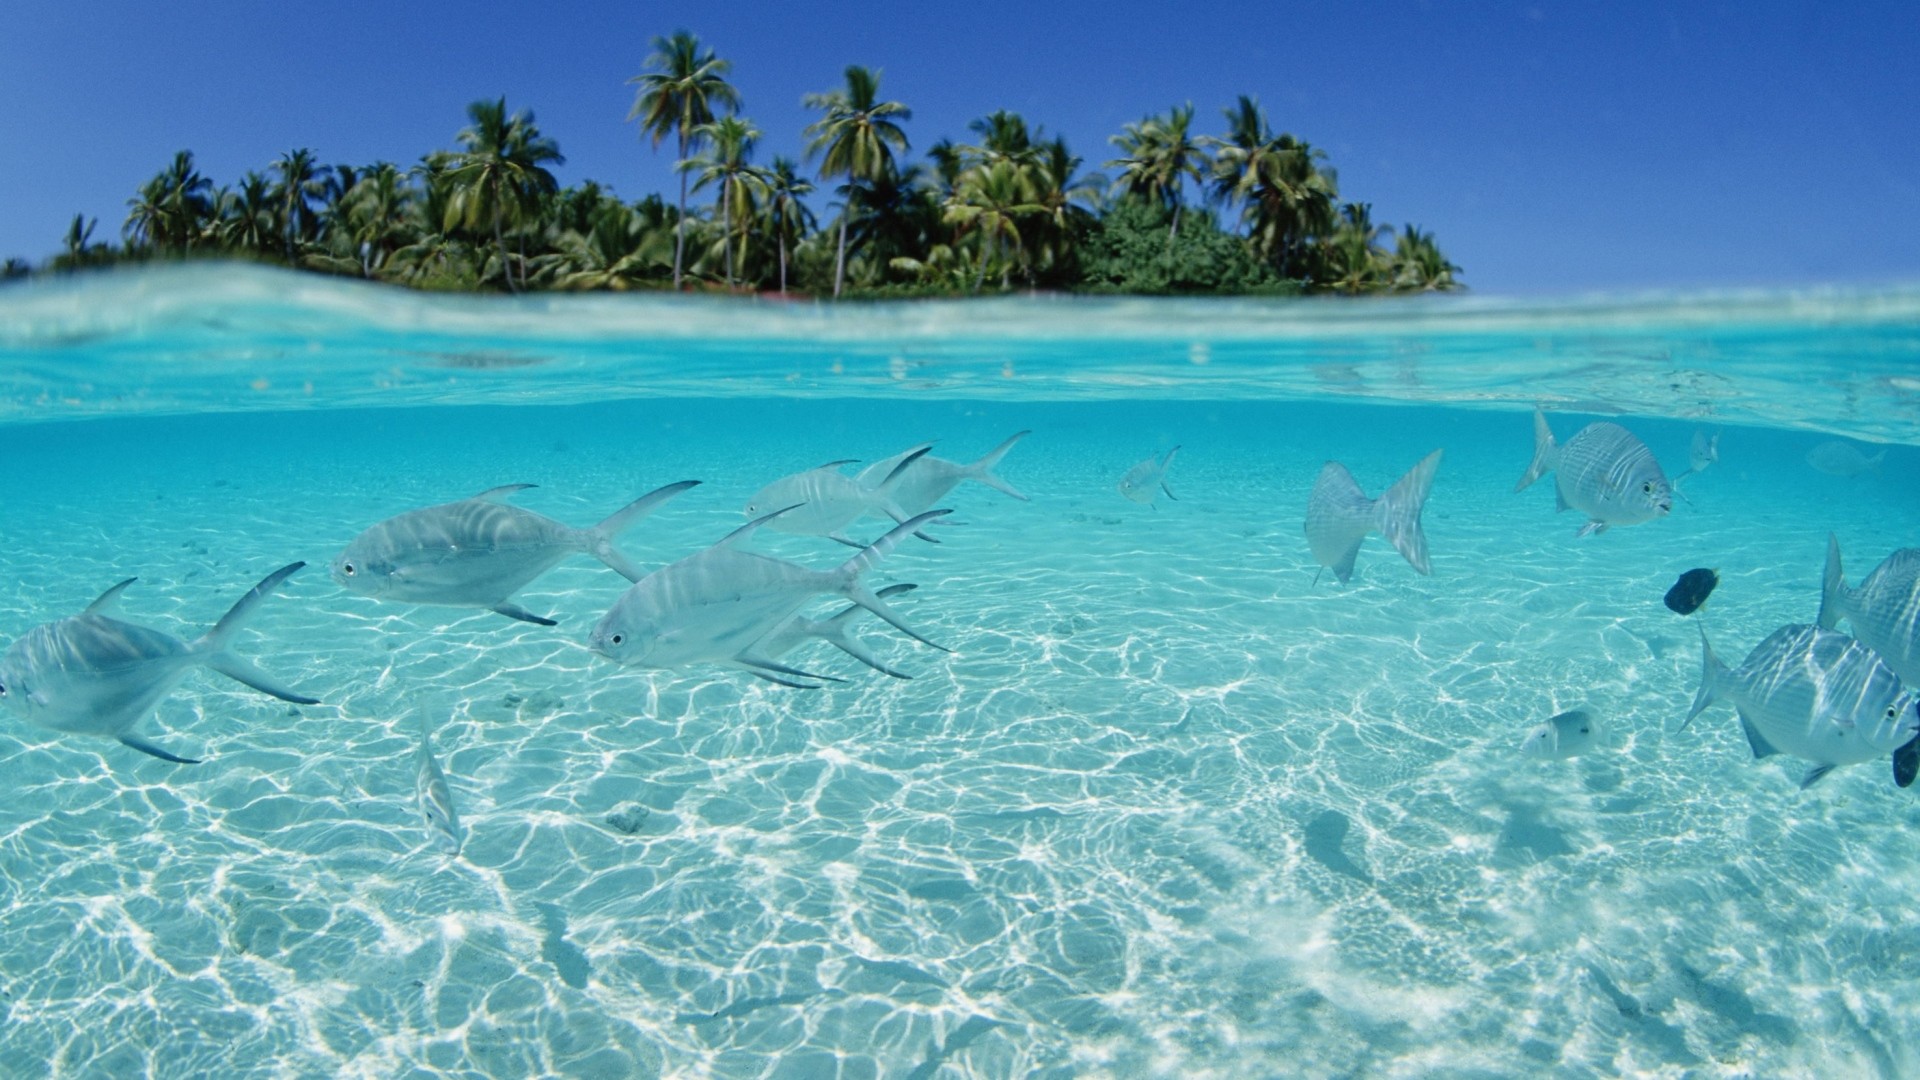 1920x1080 Preview wallpaper fish, flock, sea, shallow water, island, palm trees  